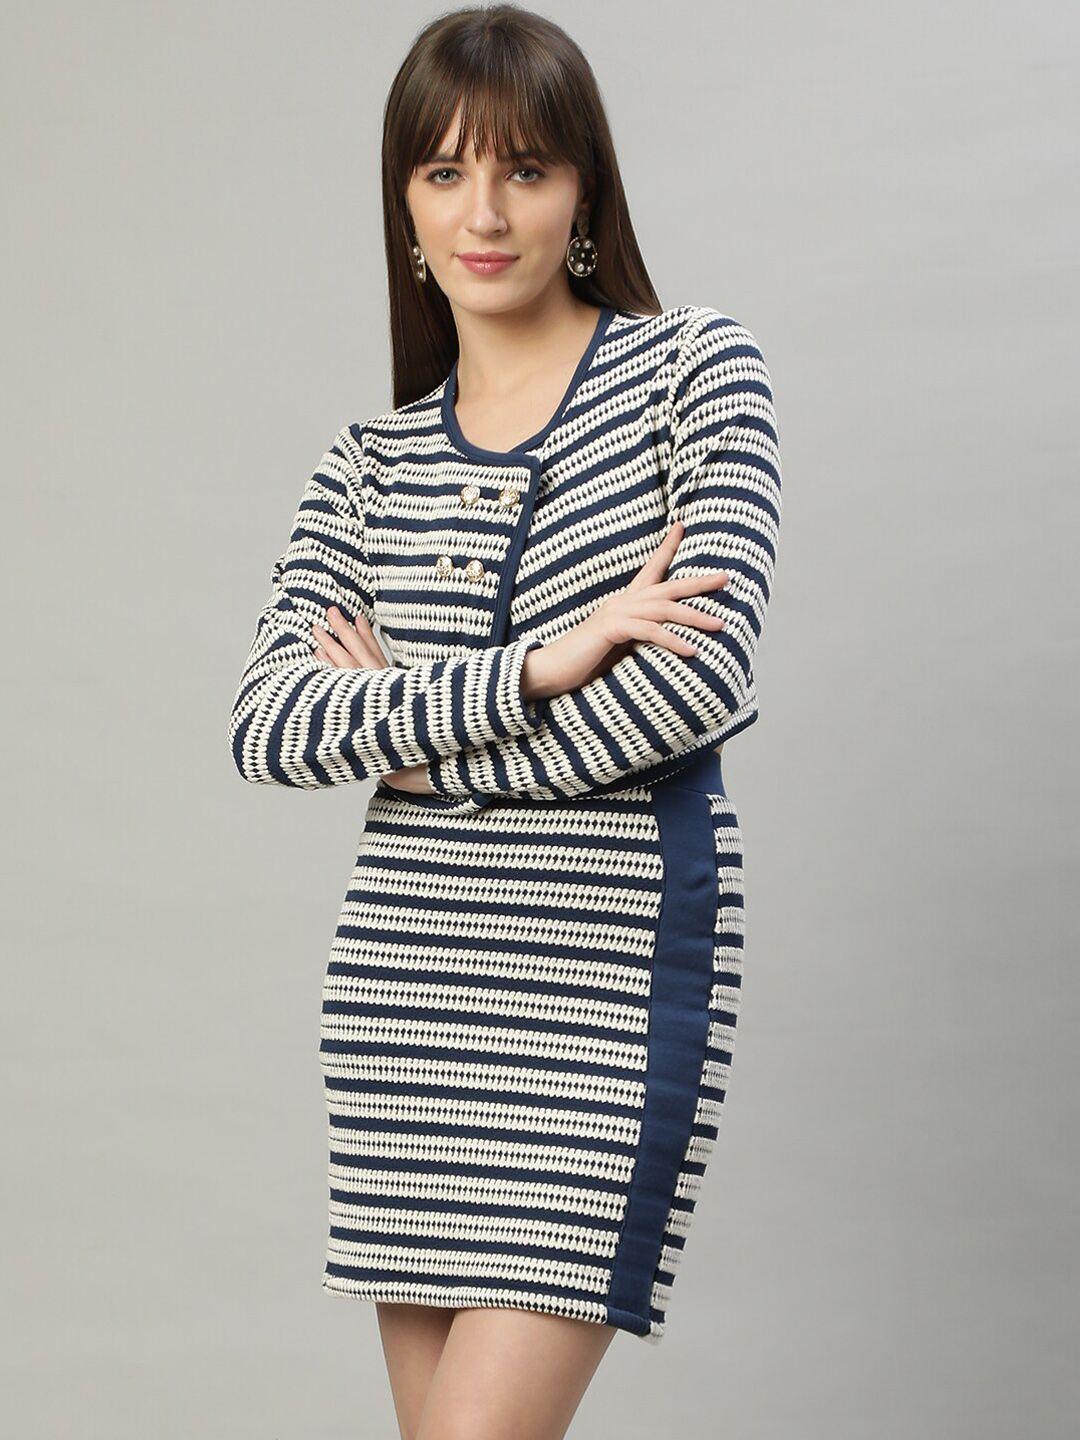 delan-striped-long-sleeves-crop-top-with-mini-skirt